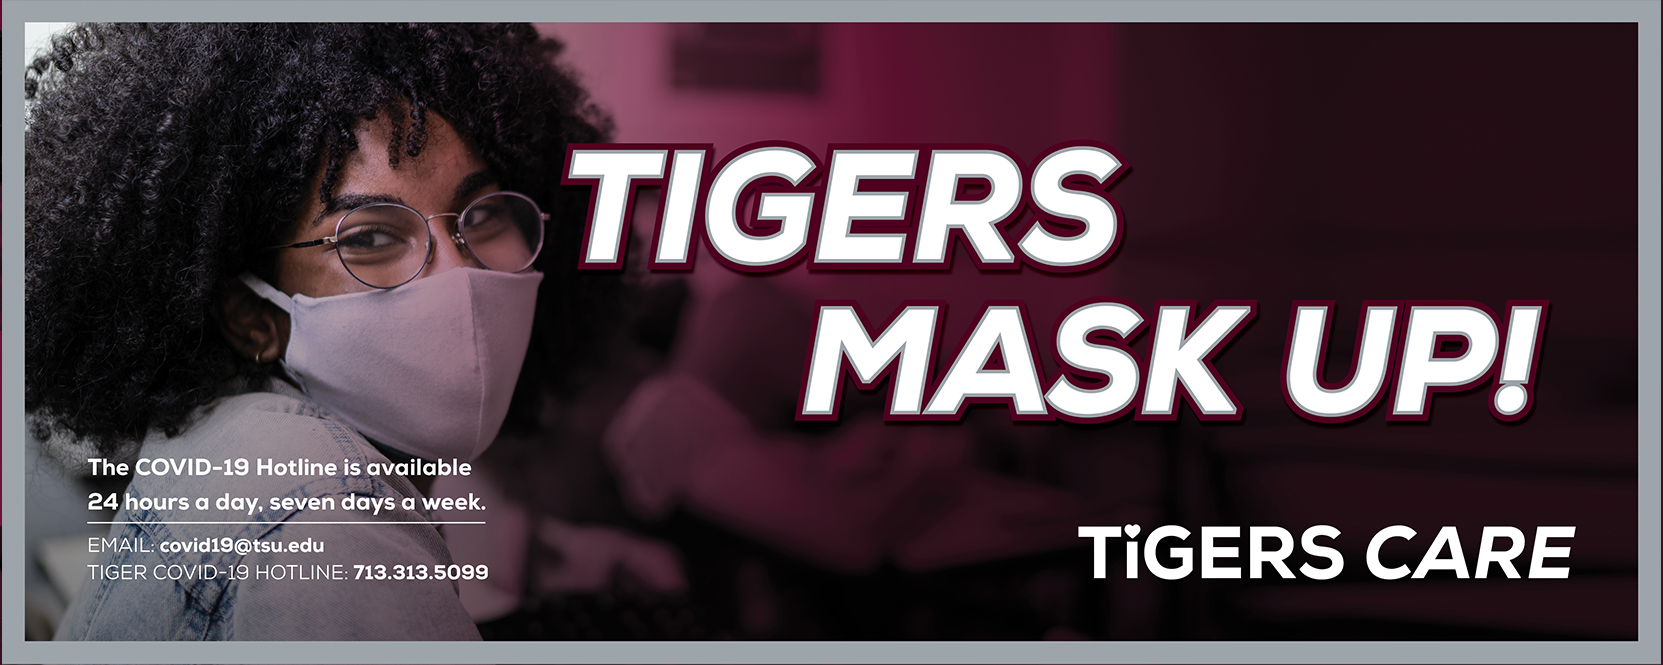 Tigers Mask Up Announcement